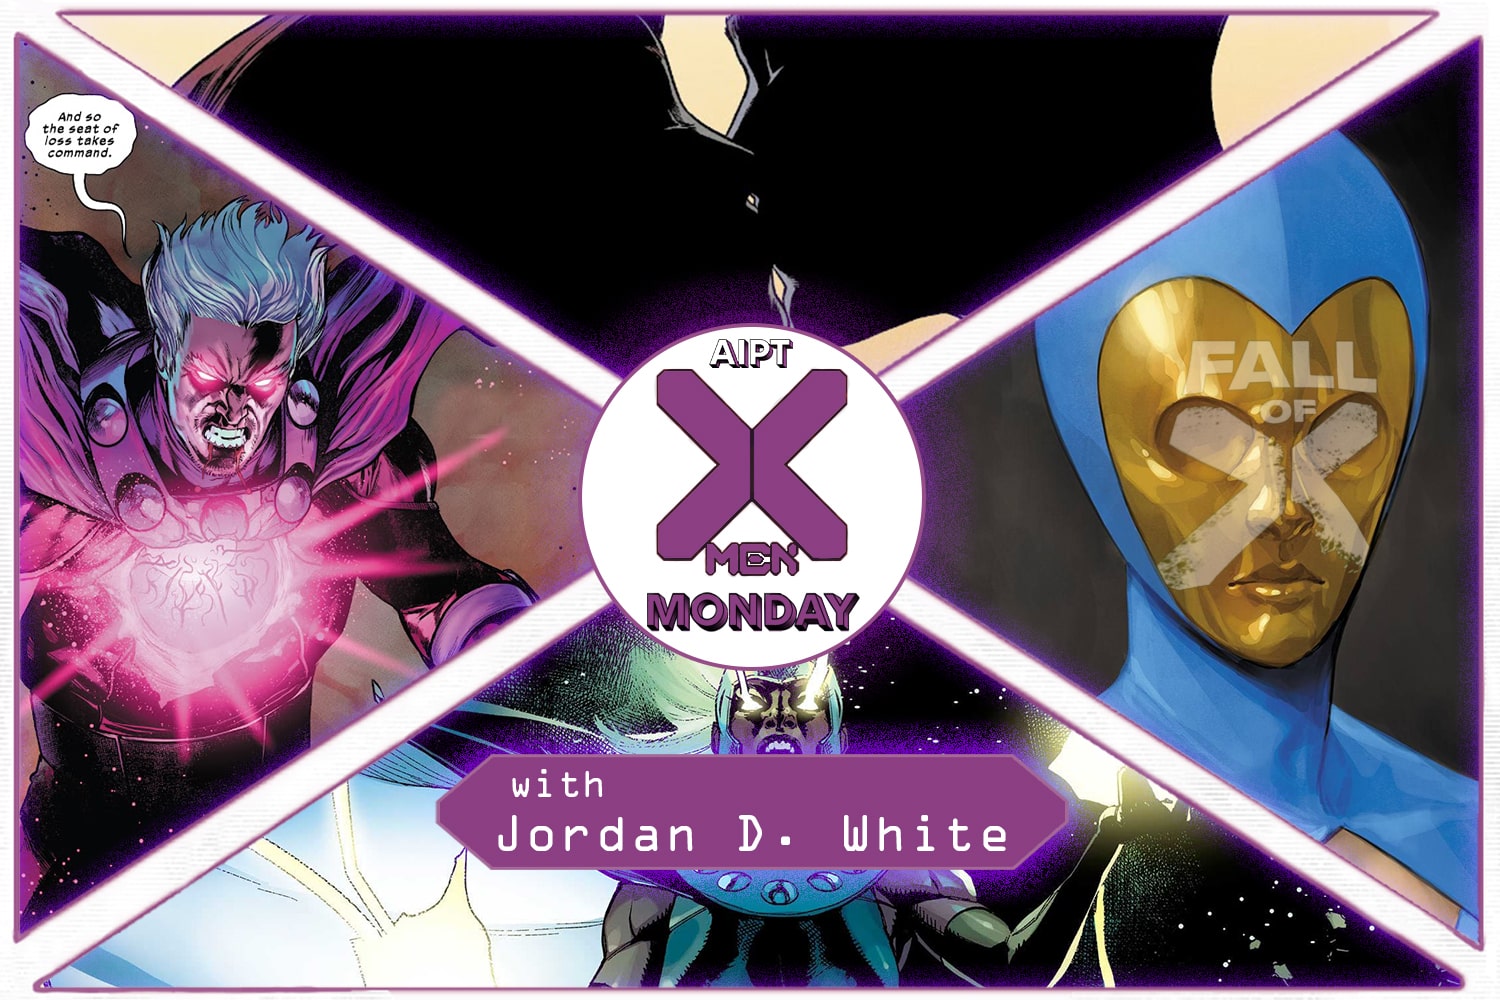 X-Men Monday #185 - Jordan D. White Reflects on 2022 and Teases 2023